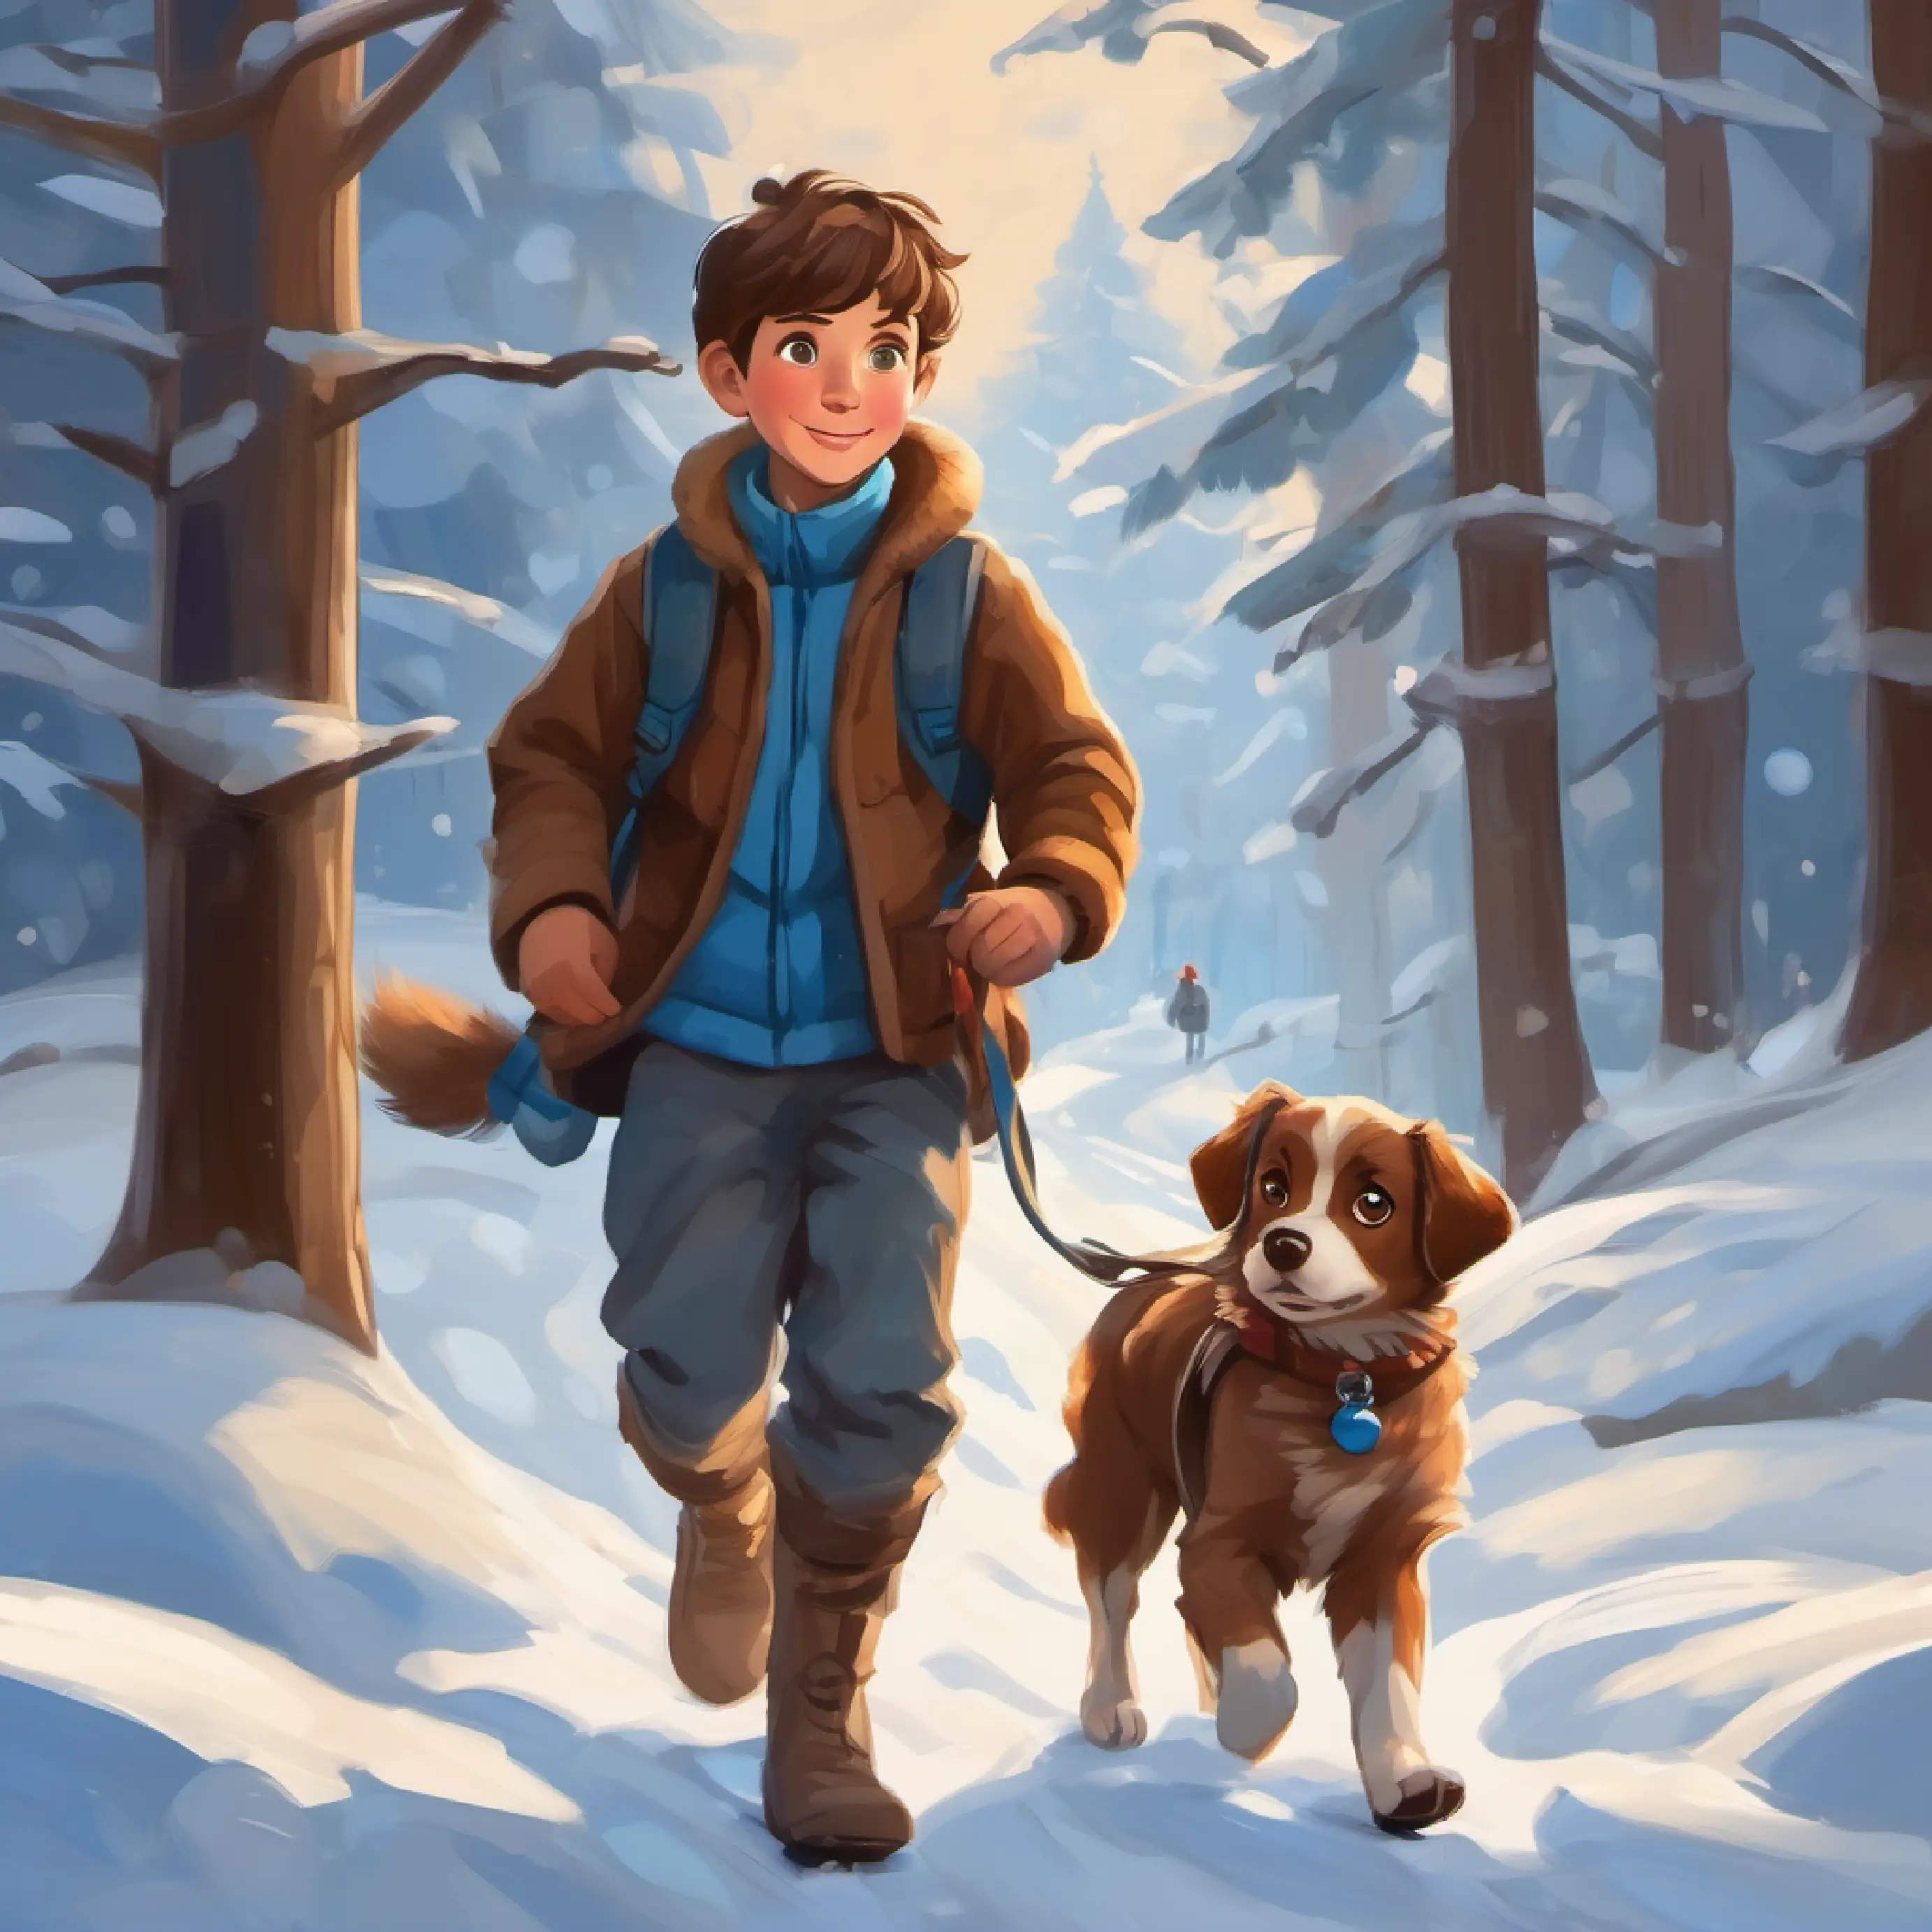 A young boy with brown hair and blue eyes and A small, playful dog with brown fur start their adventure, leaving the house for the woods.